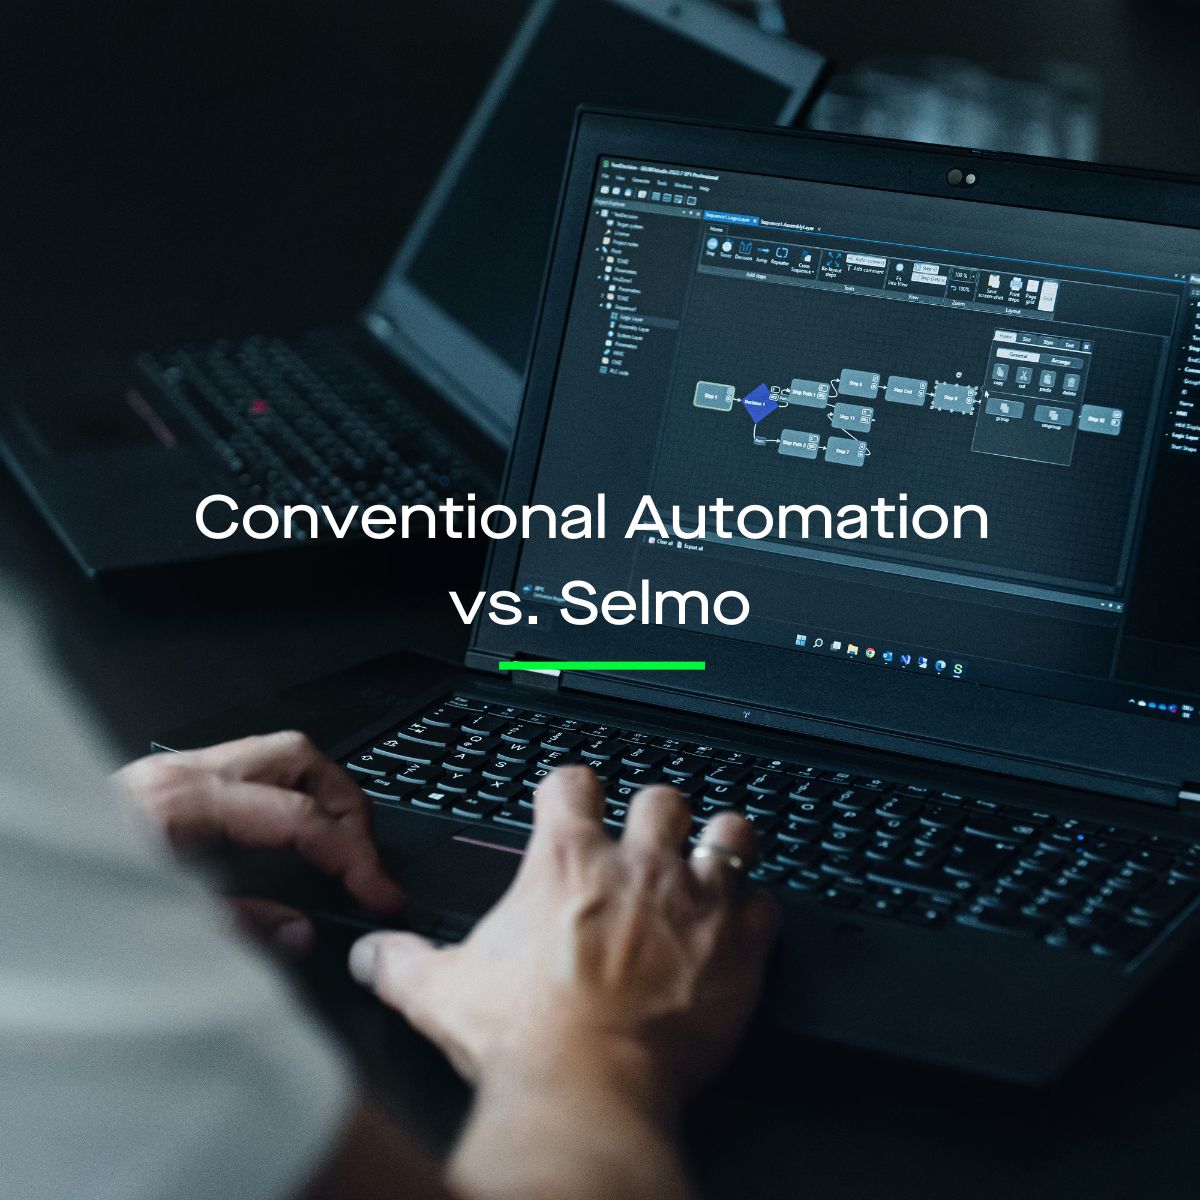 Conventional automation vs selmo